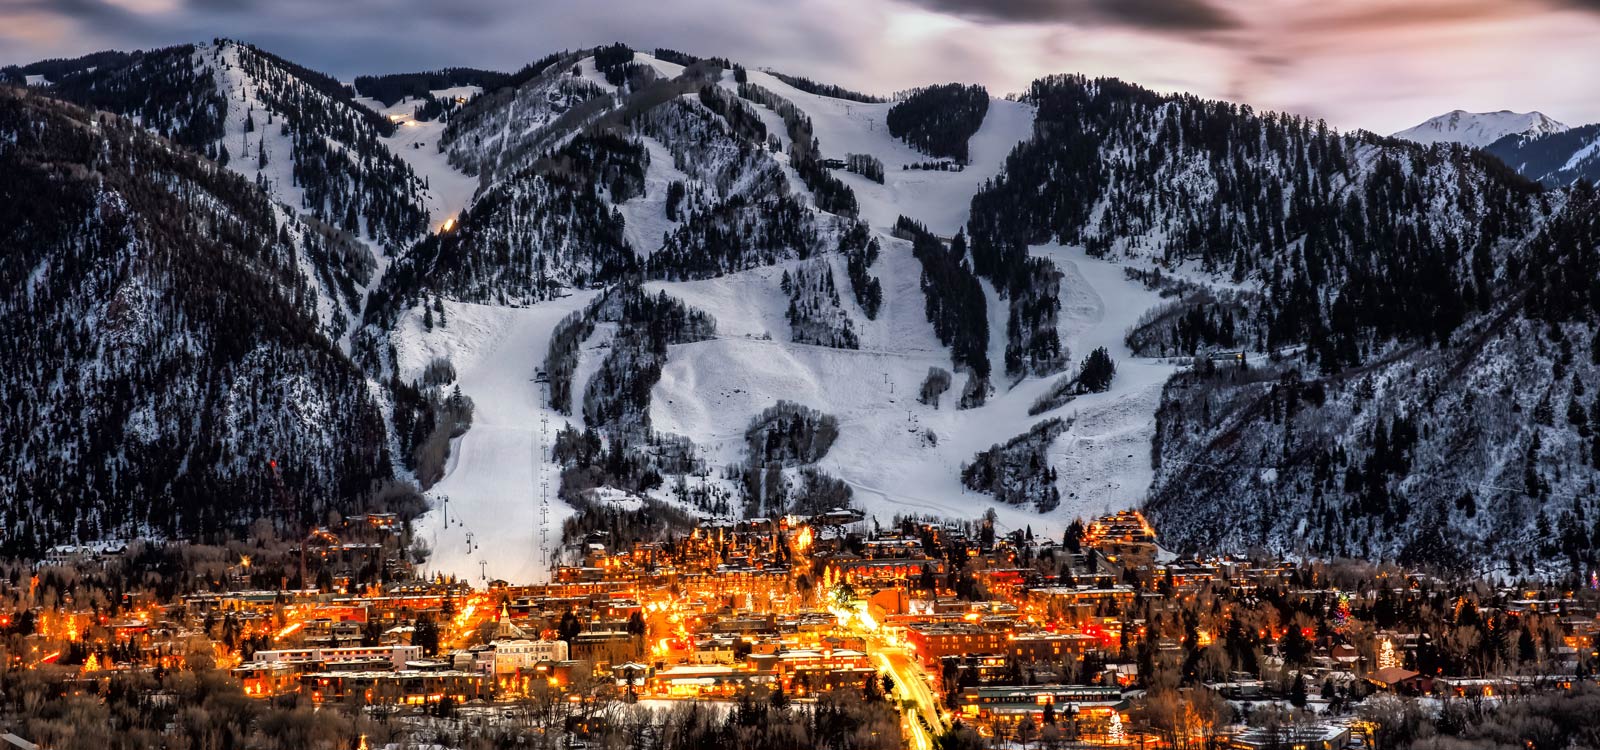 Best Of Aspen Snowmass According to Christie's